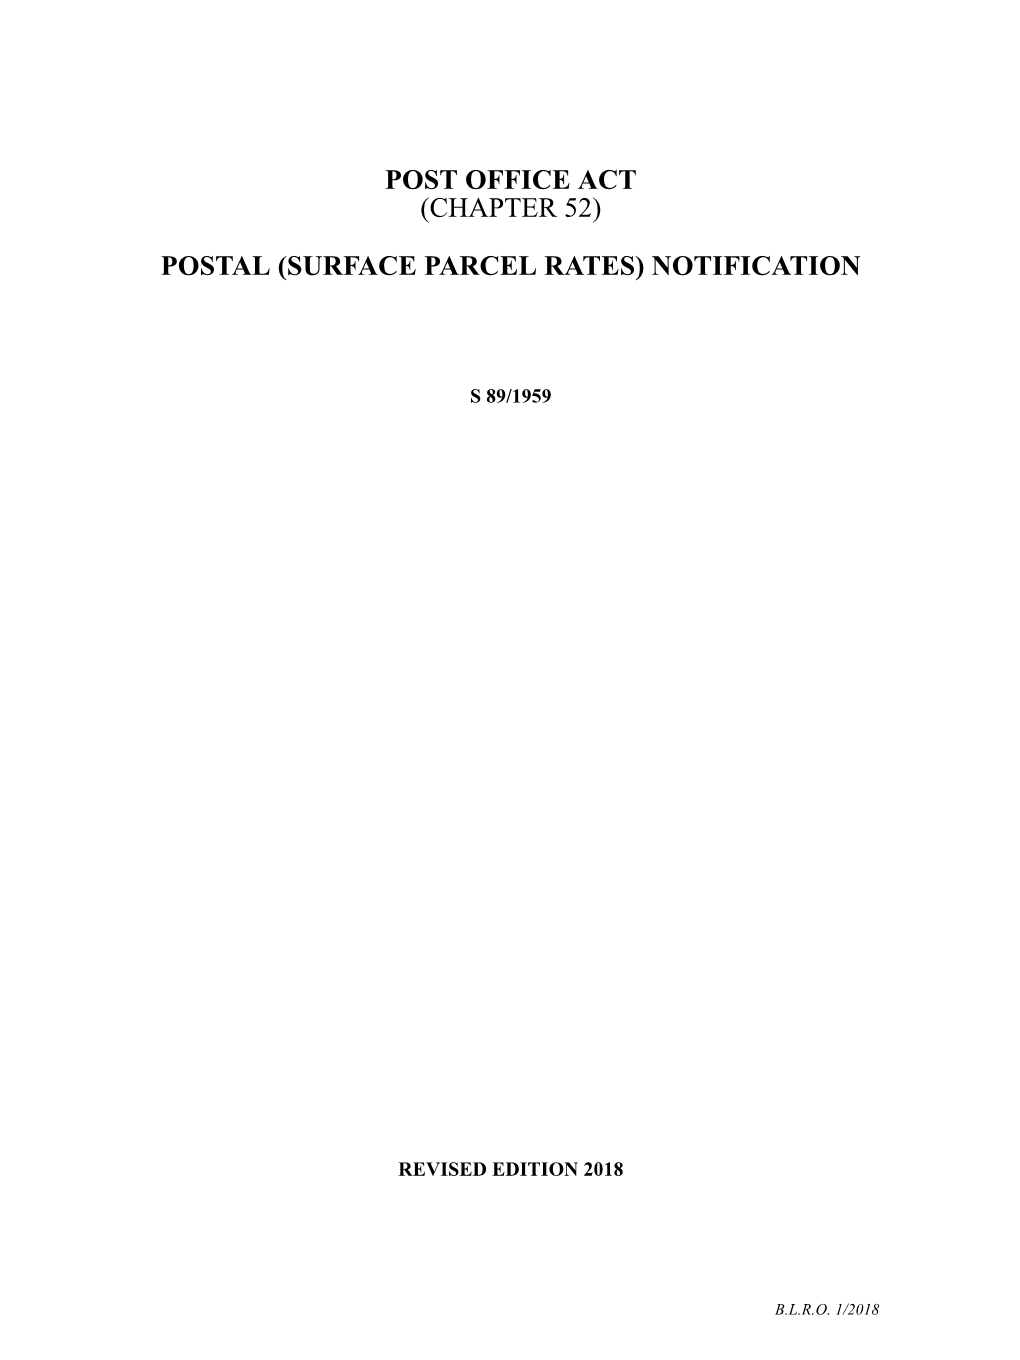 Post Office Act (Chapter 52) Postal (Surface Parcel Rates) Notification